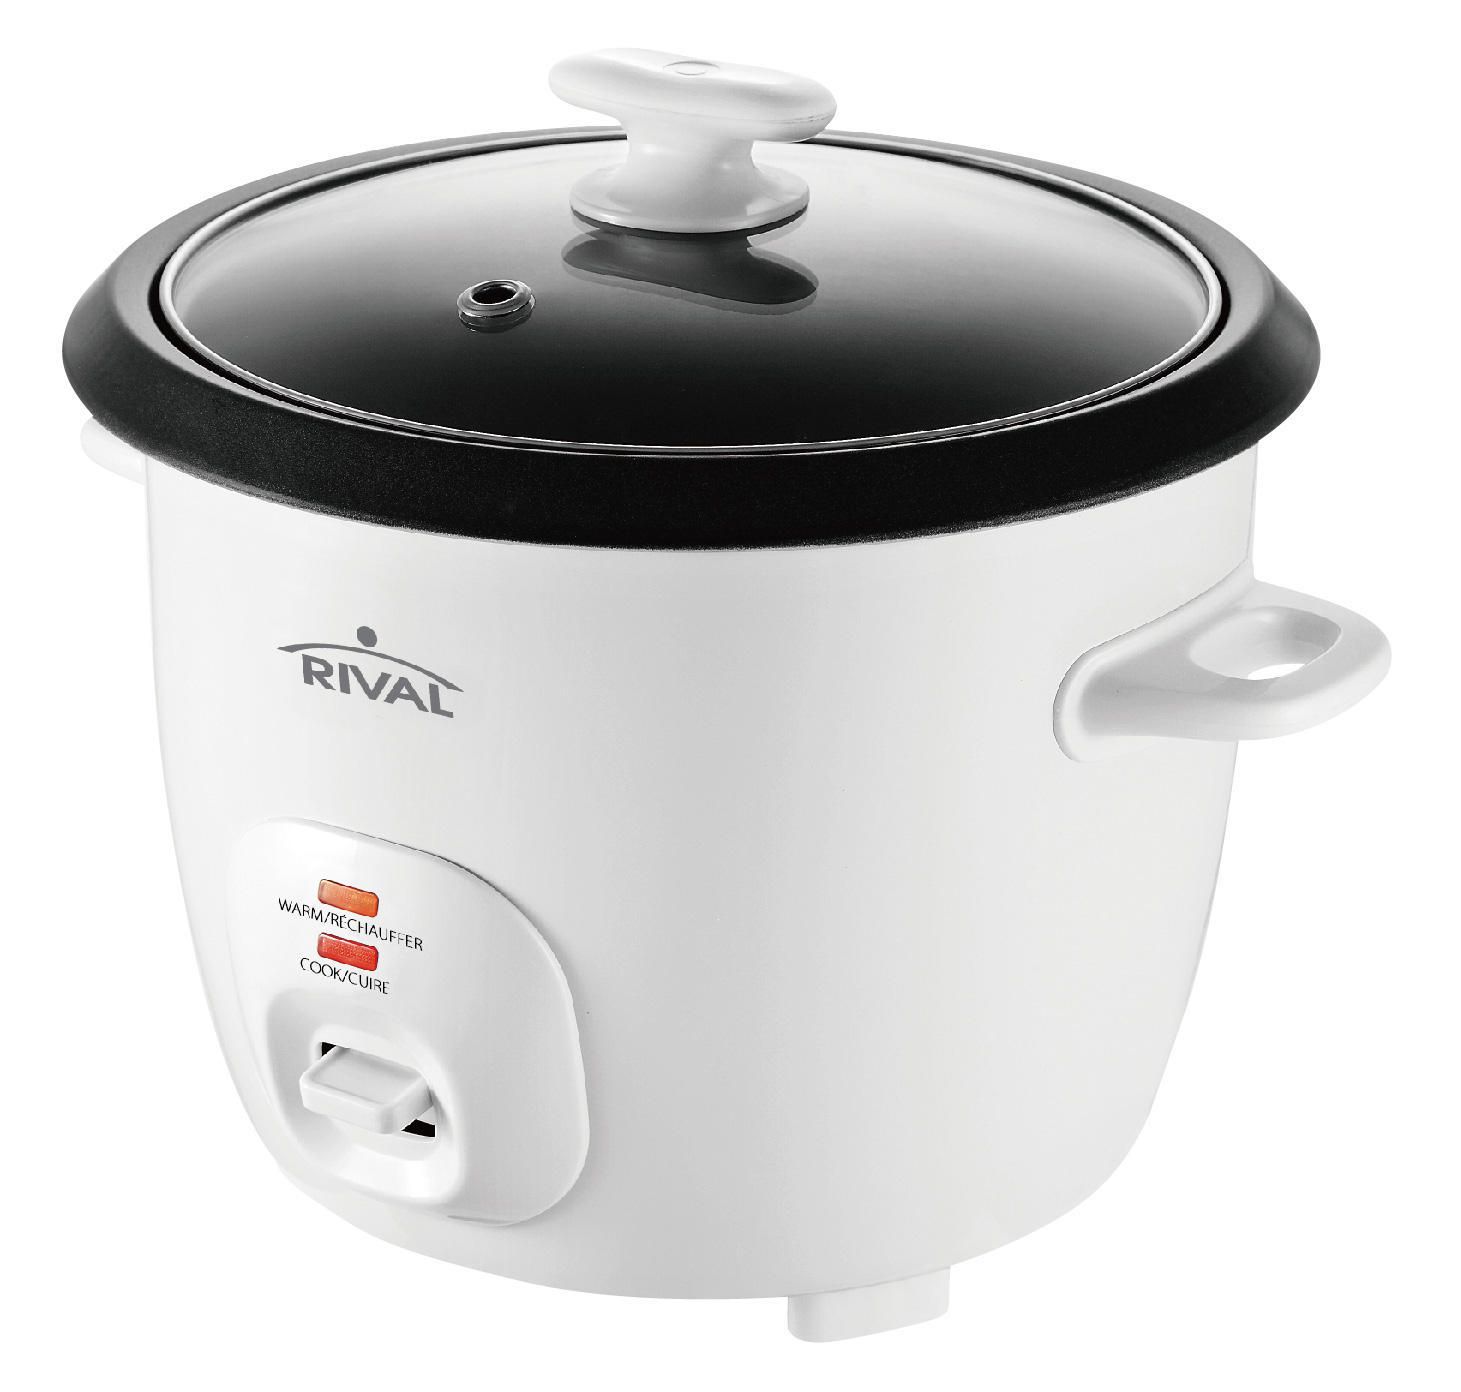 How To Use Rival Rice Cooker